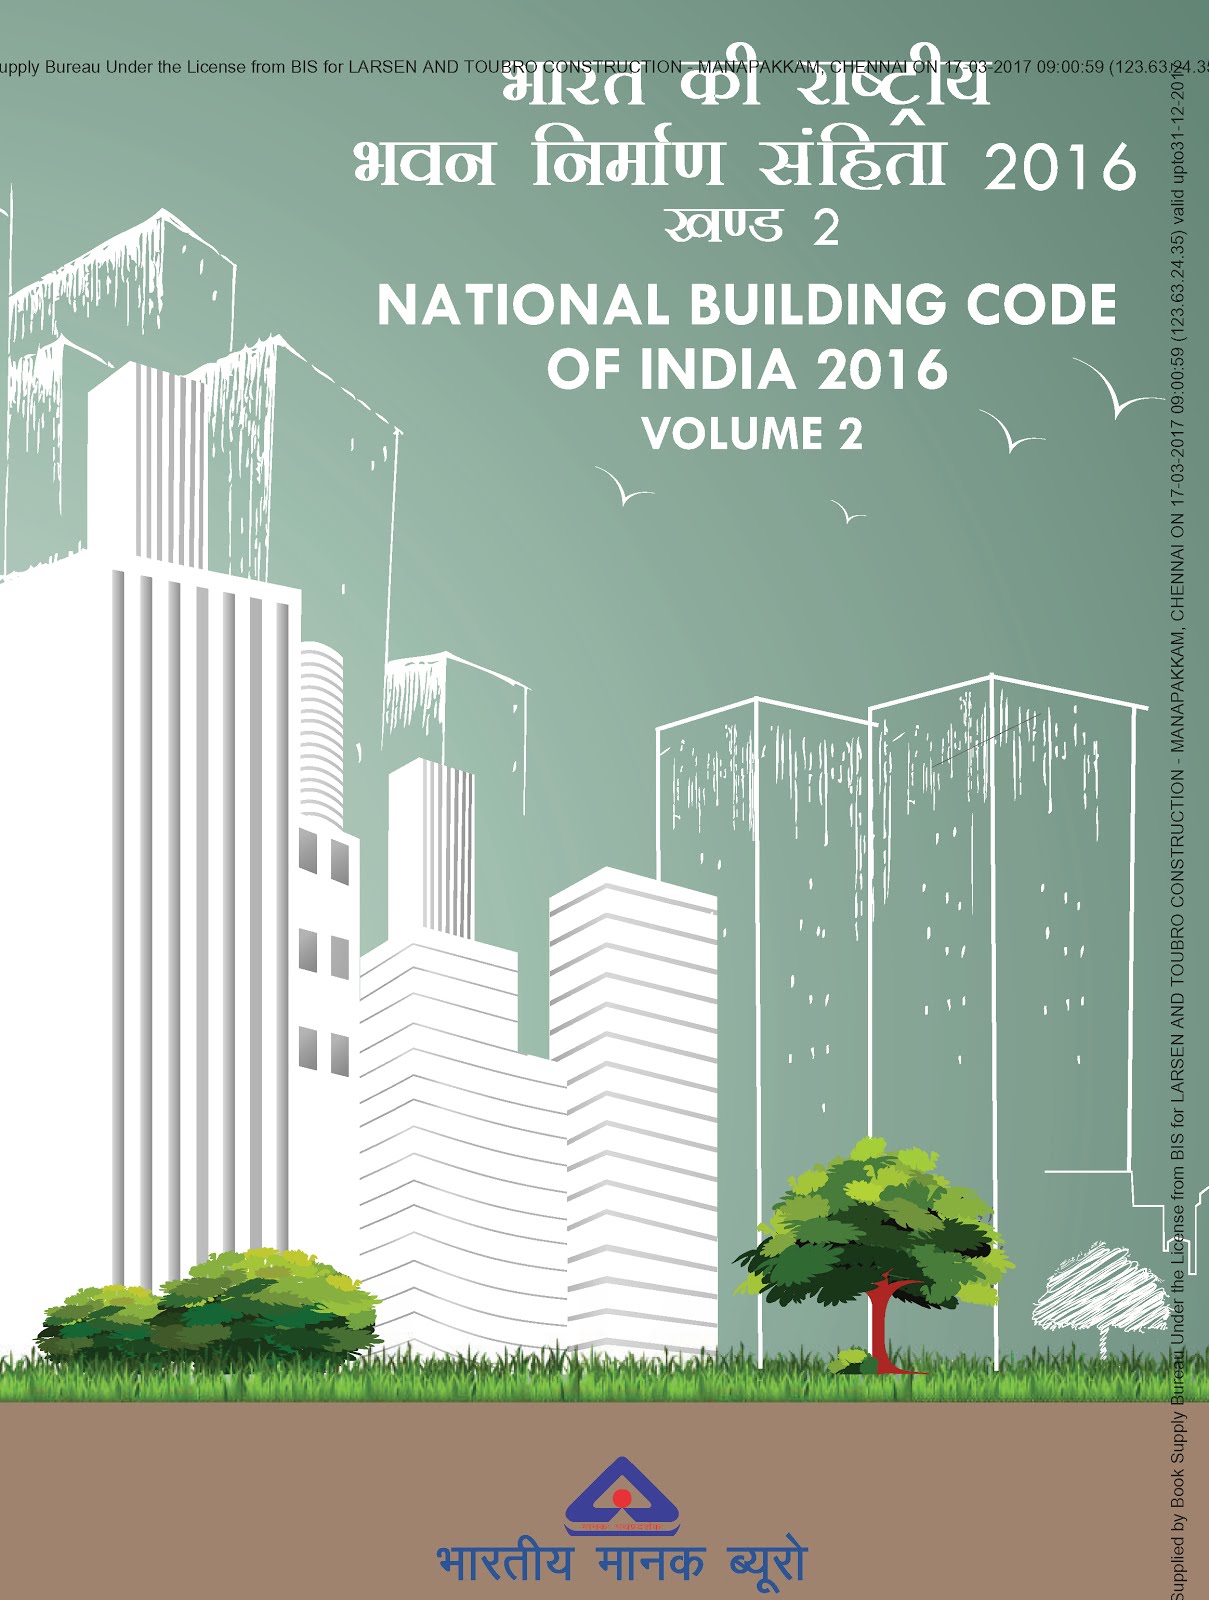 National Building Code of India 2016, Volume - 2